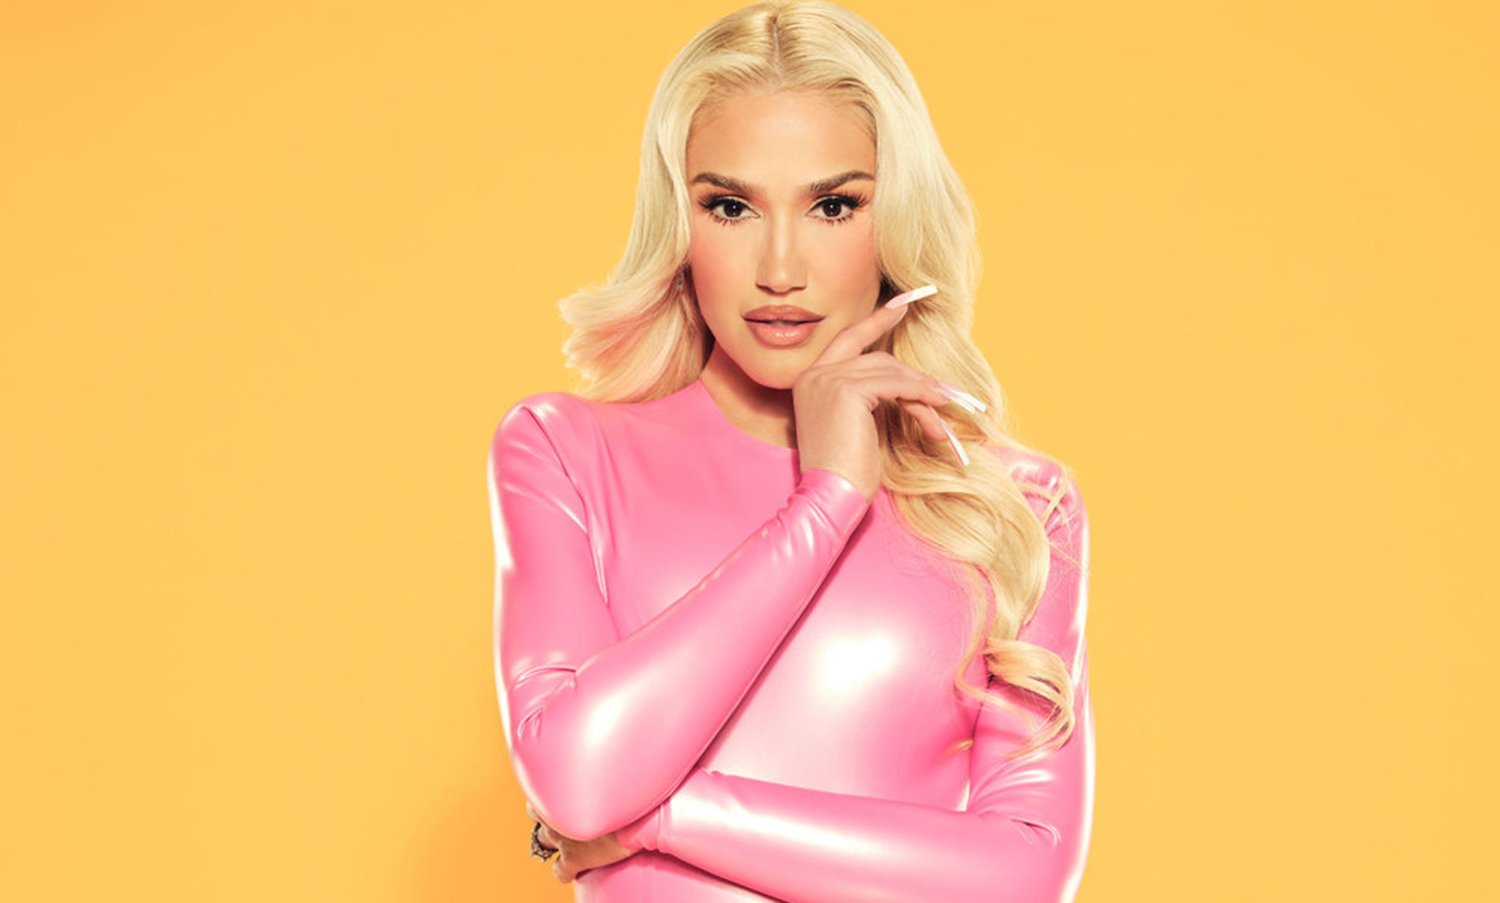 Gwen Stefani poses in a pink dress against a yellow backdrop for The Voice Season 22